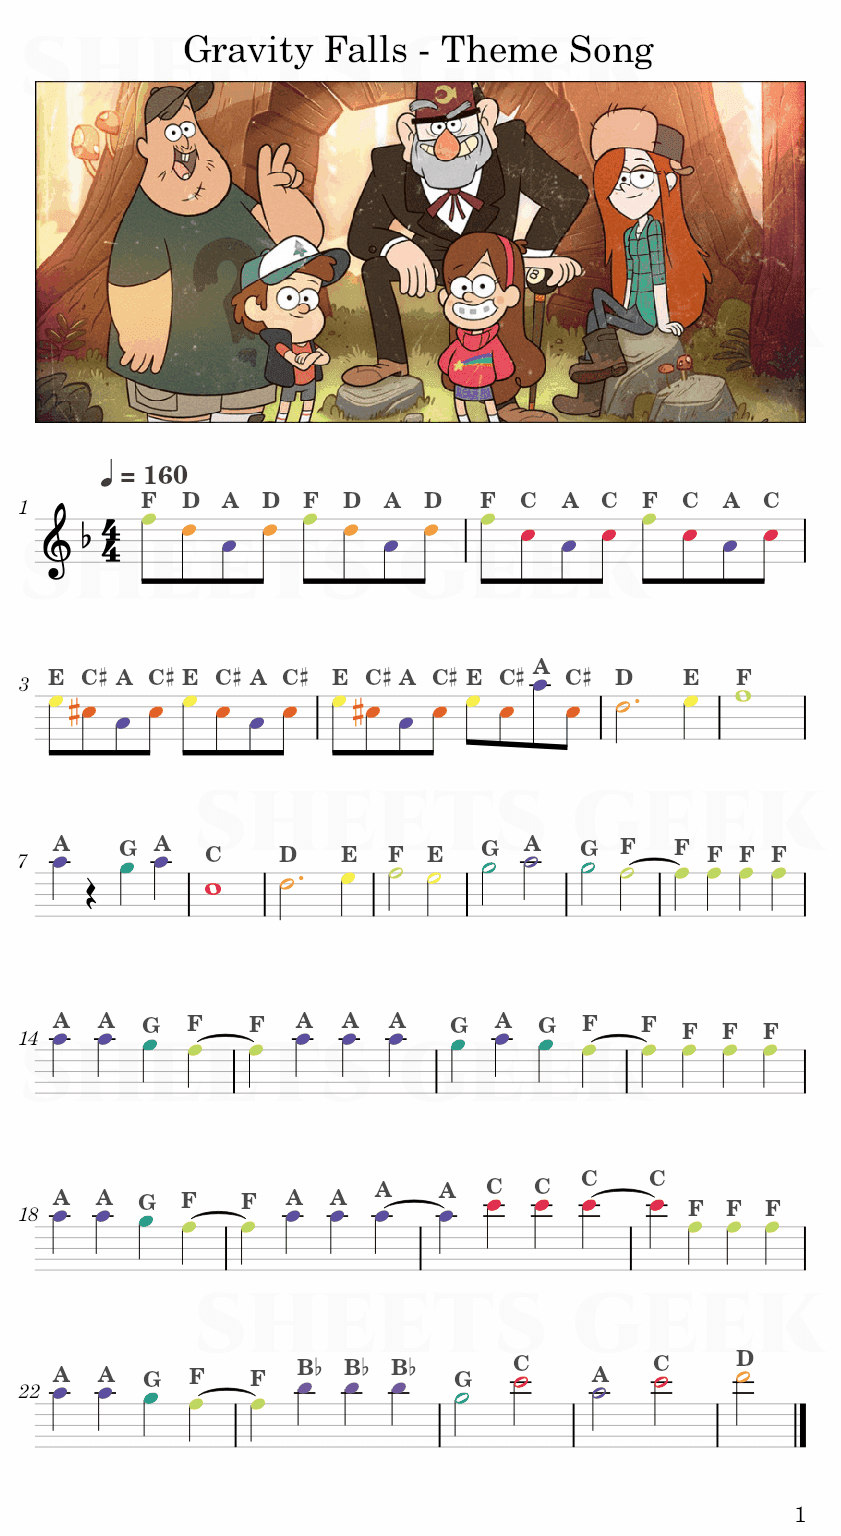 Gravity Falls - Theme Song Easy Sheets Music Free for piano, keyboard, flute, violin, sax, celllo 1